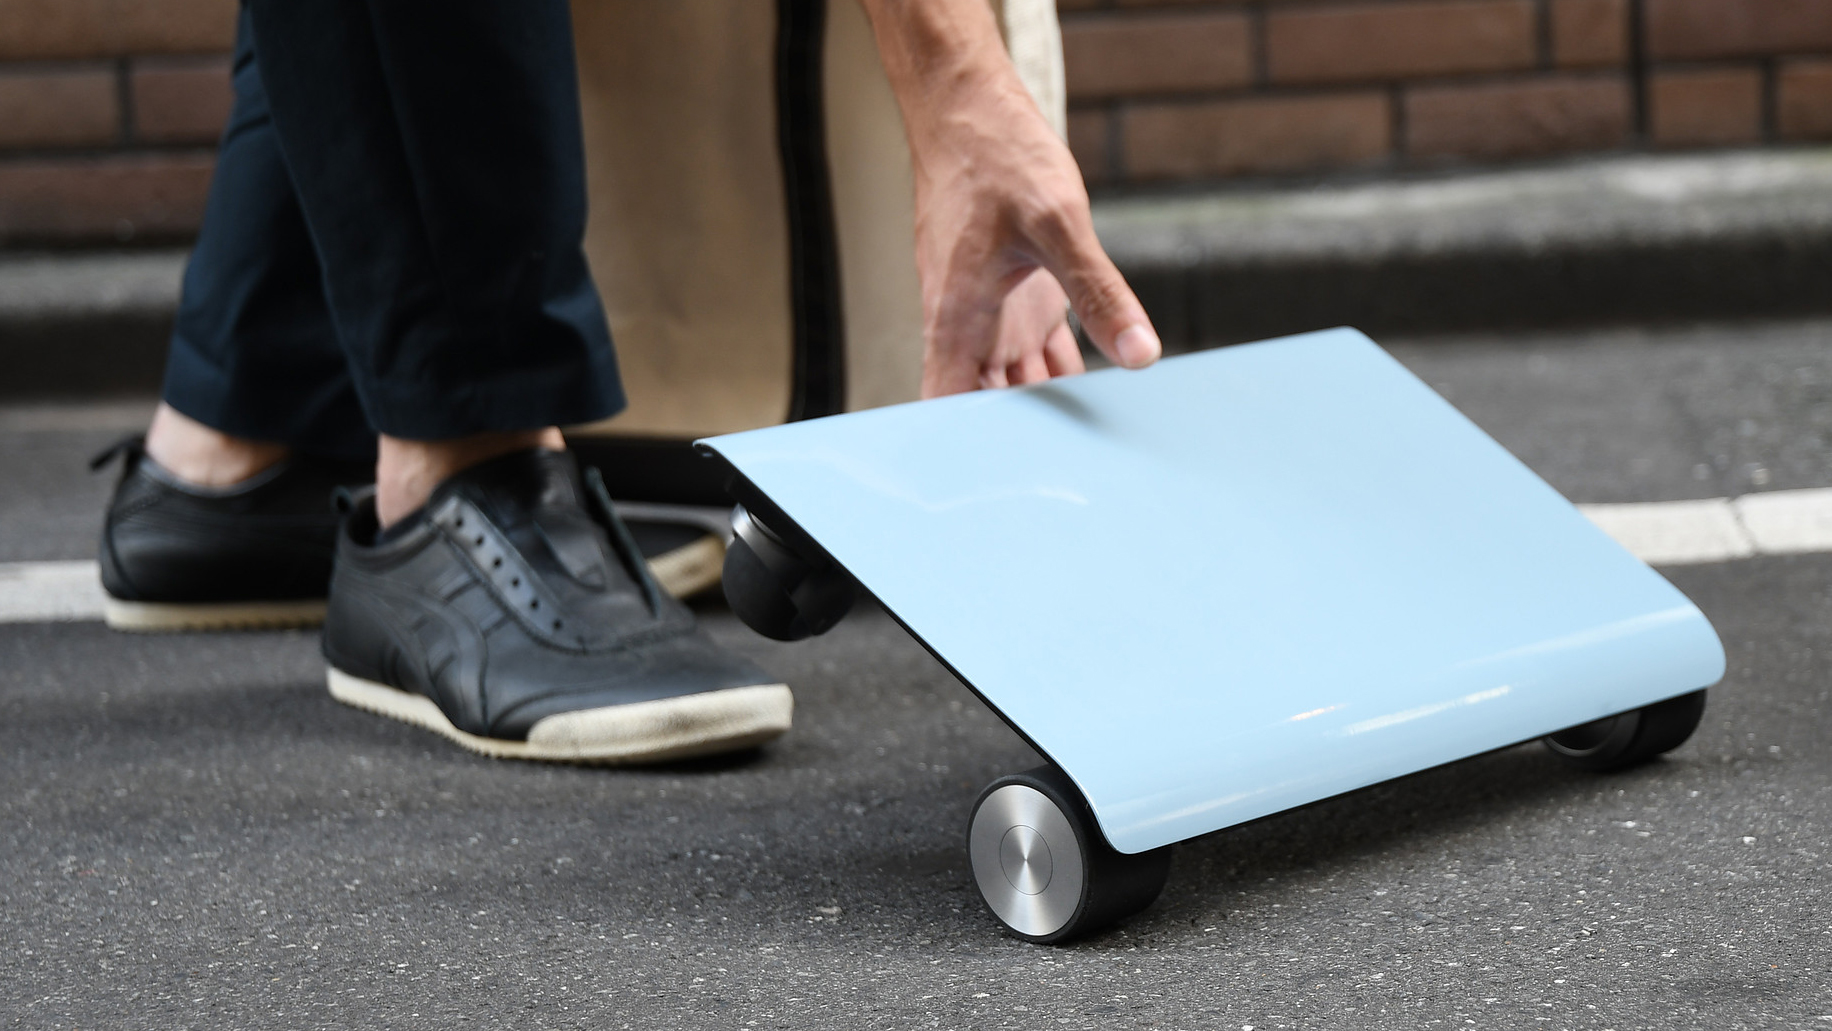 You Can Soon Buy That Tiny Scooter That Looks Like A Laptop You Can Ride